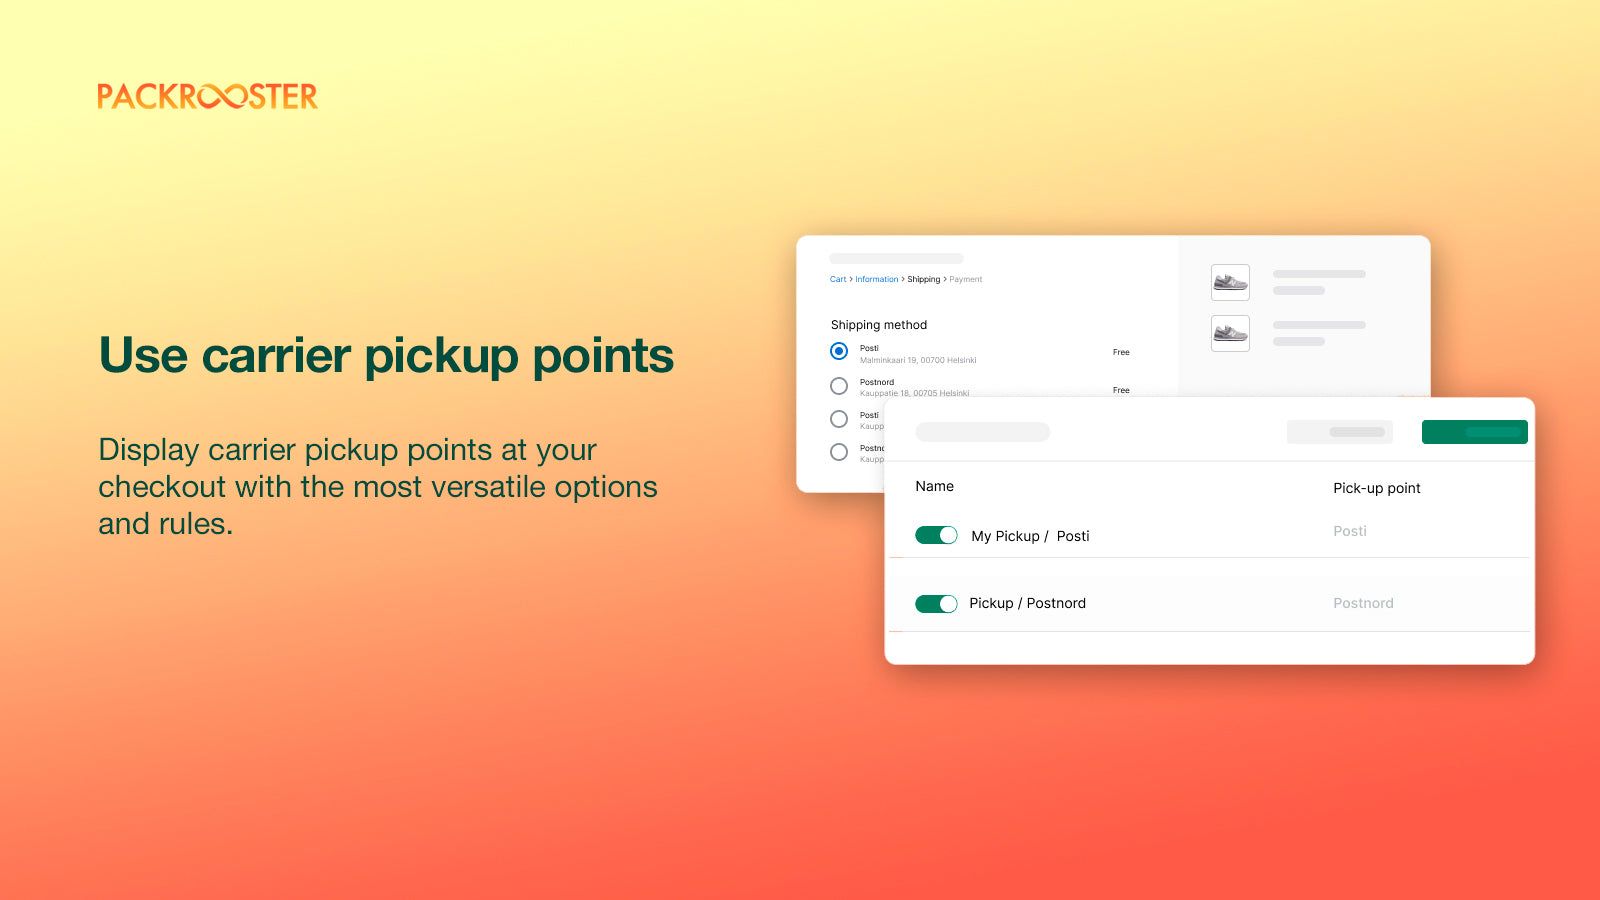 Show carrier pickup points at checkout